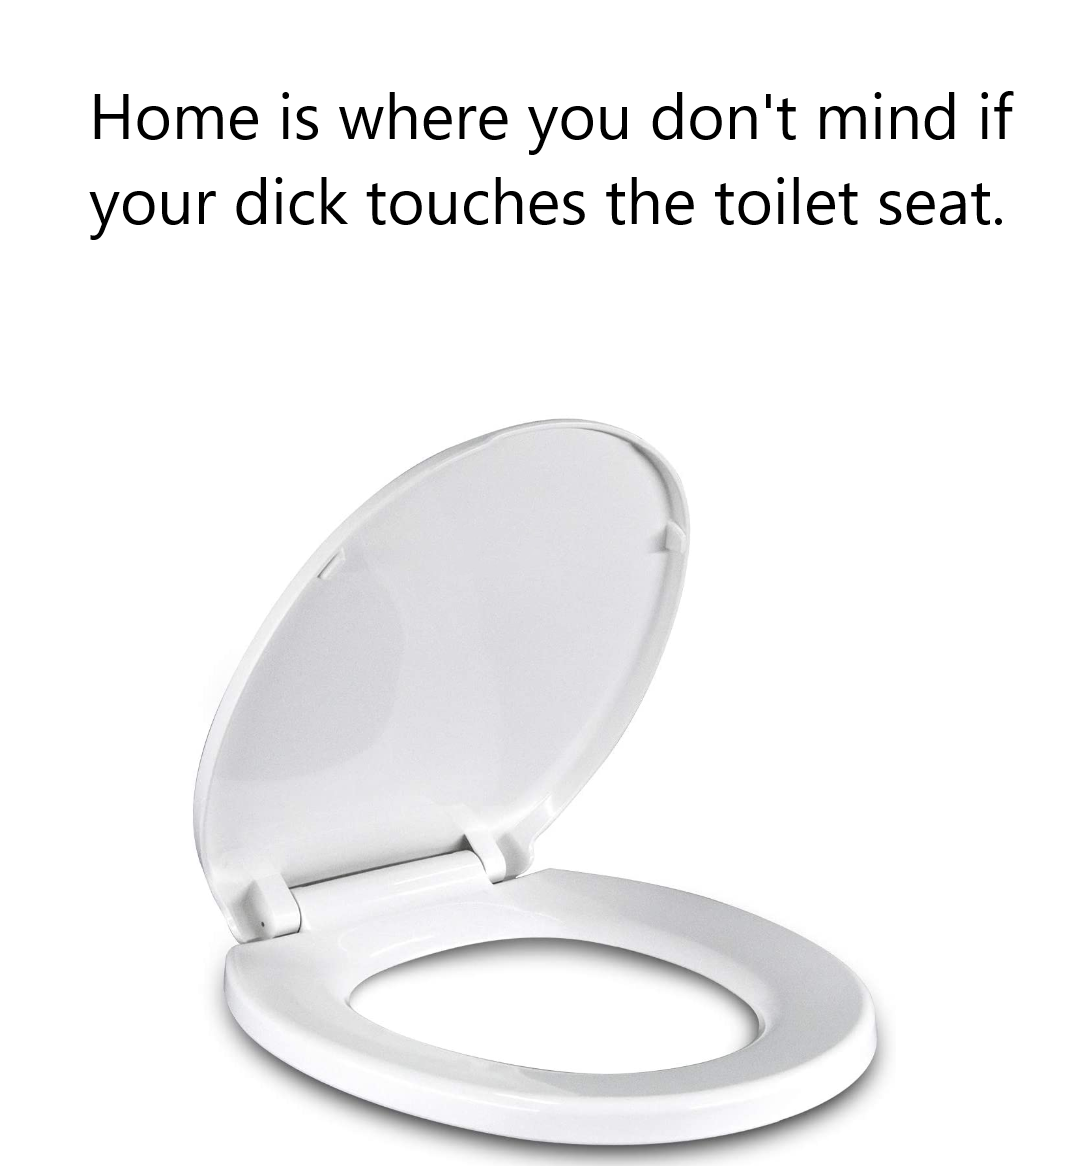 hilarious memes - toilet seat - Home is where you don't mind if your dick touches the toilet seat.